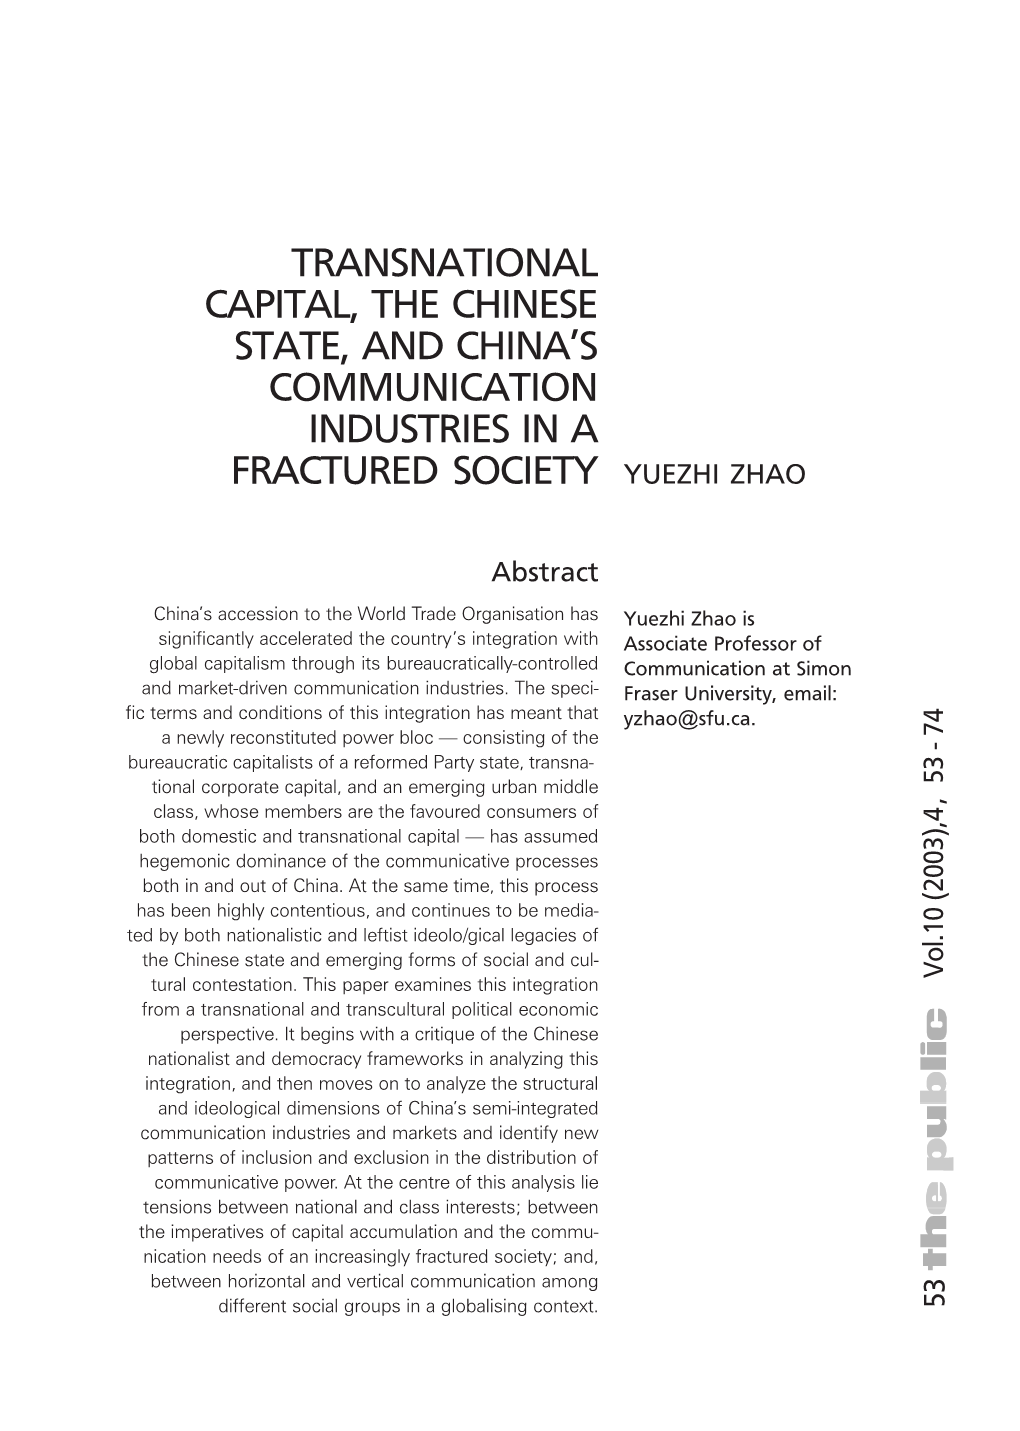 Transnational Capital, the Chinese State, and China's Communication